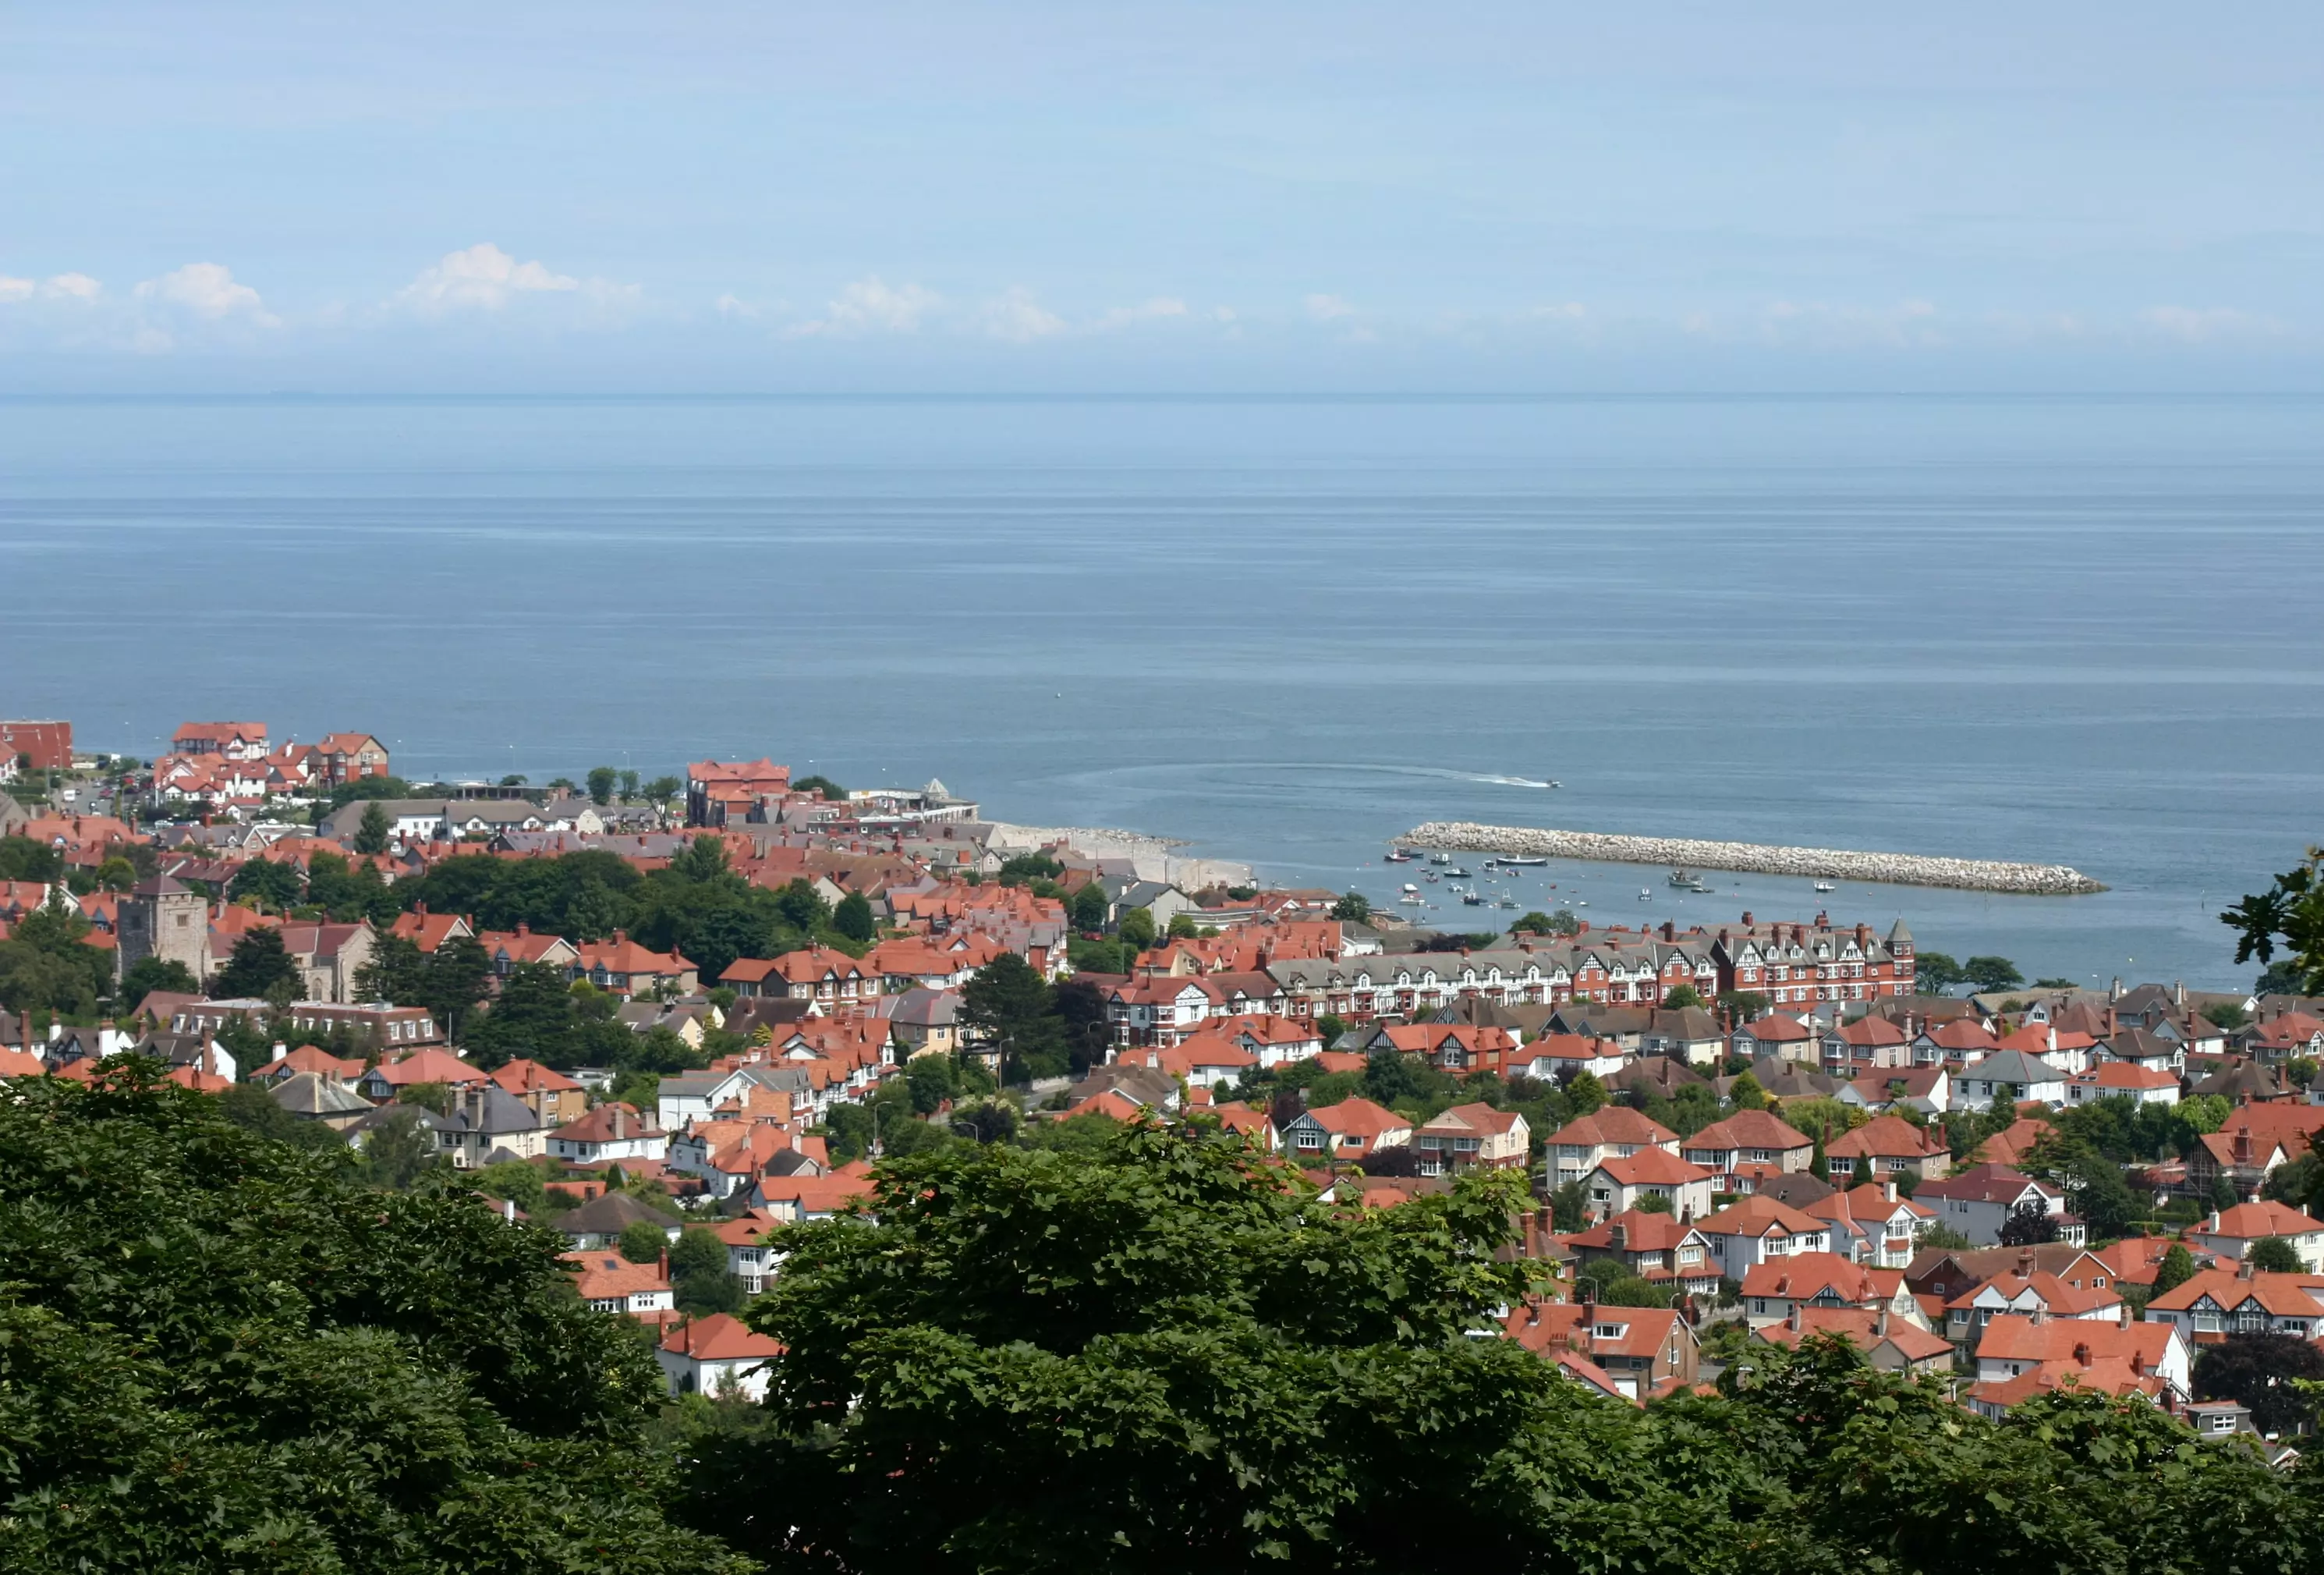 Wide-angle photo of Colwyn Bay, Wales, showing the local buildings by the sea, taken in bright sunshine.